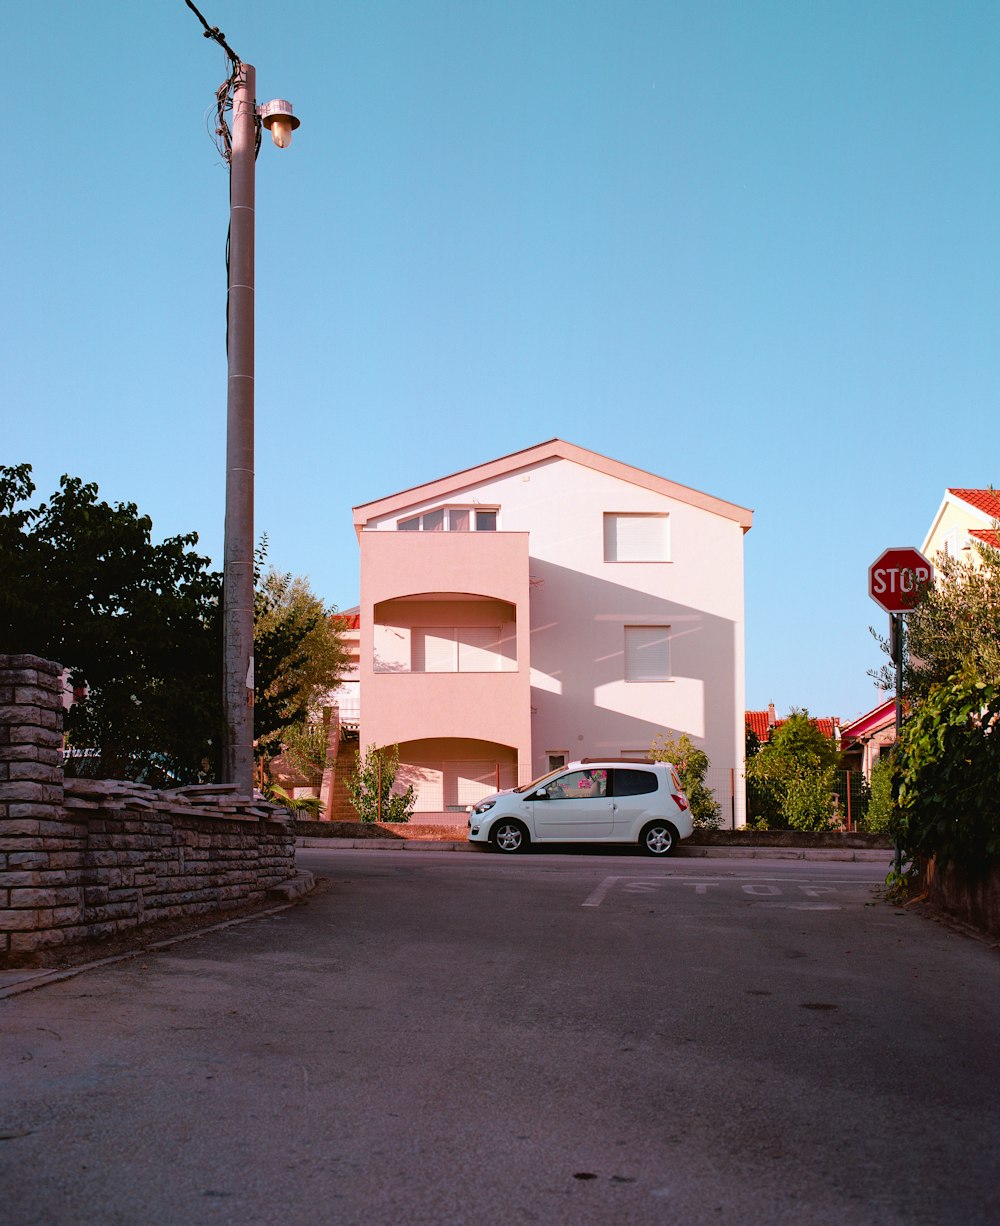 a white van parked in front of a pink building